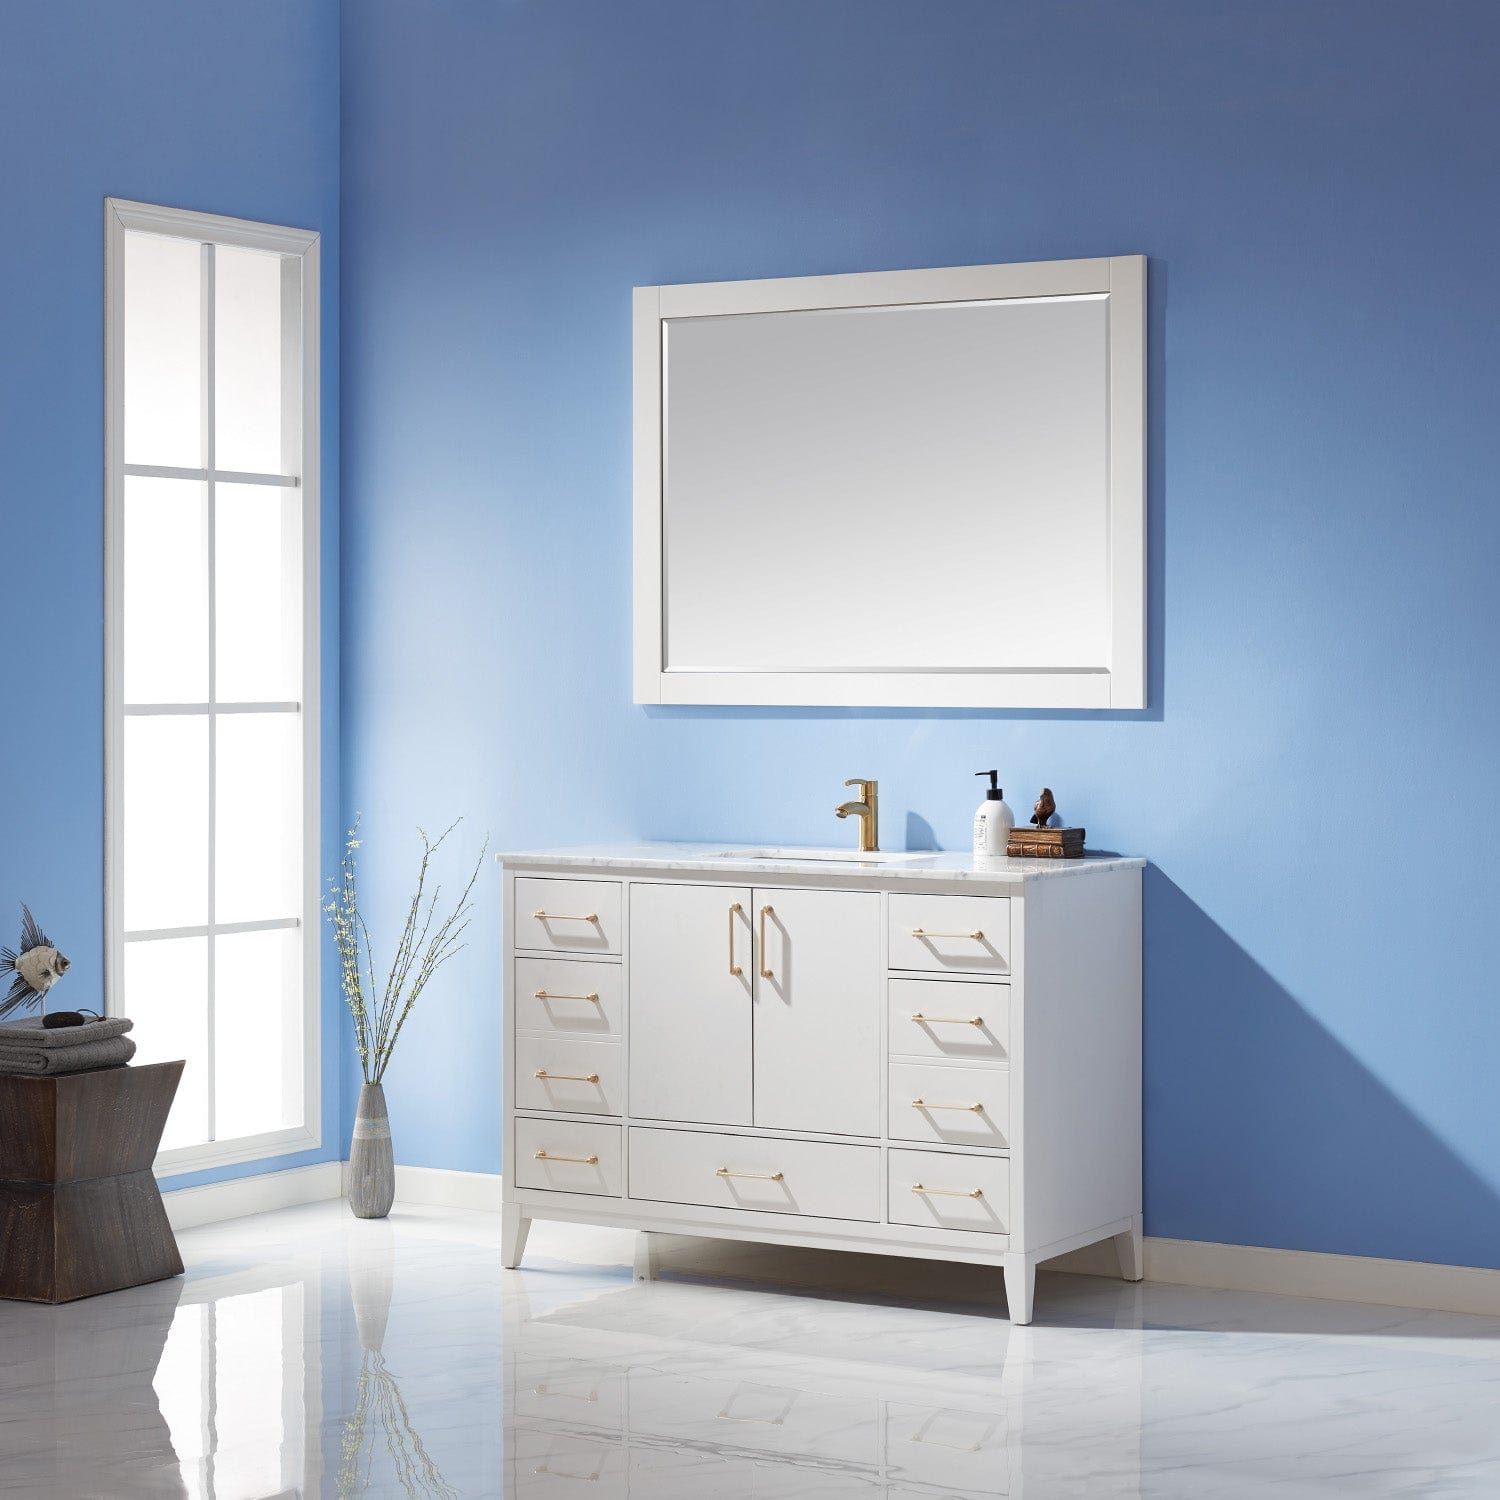 Altair Sutton 48" Single Bathroom Vanity Set in White and Carrara White Marble Countertop with Mirror 541048-WH-CA - Molaix631112971911Vanity541048-WH-CA